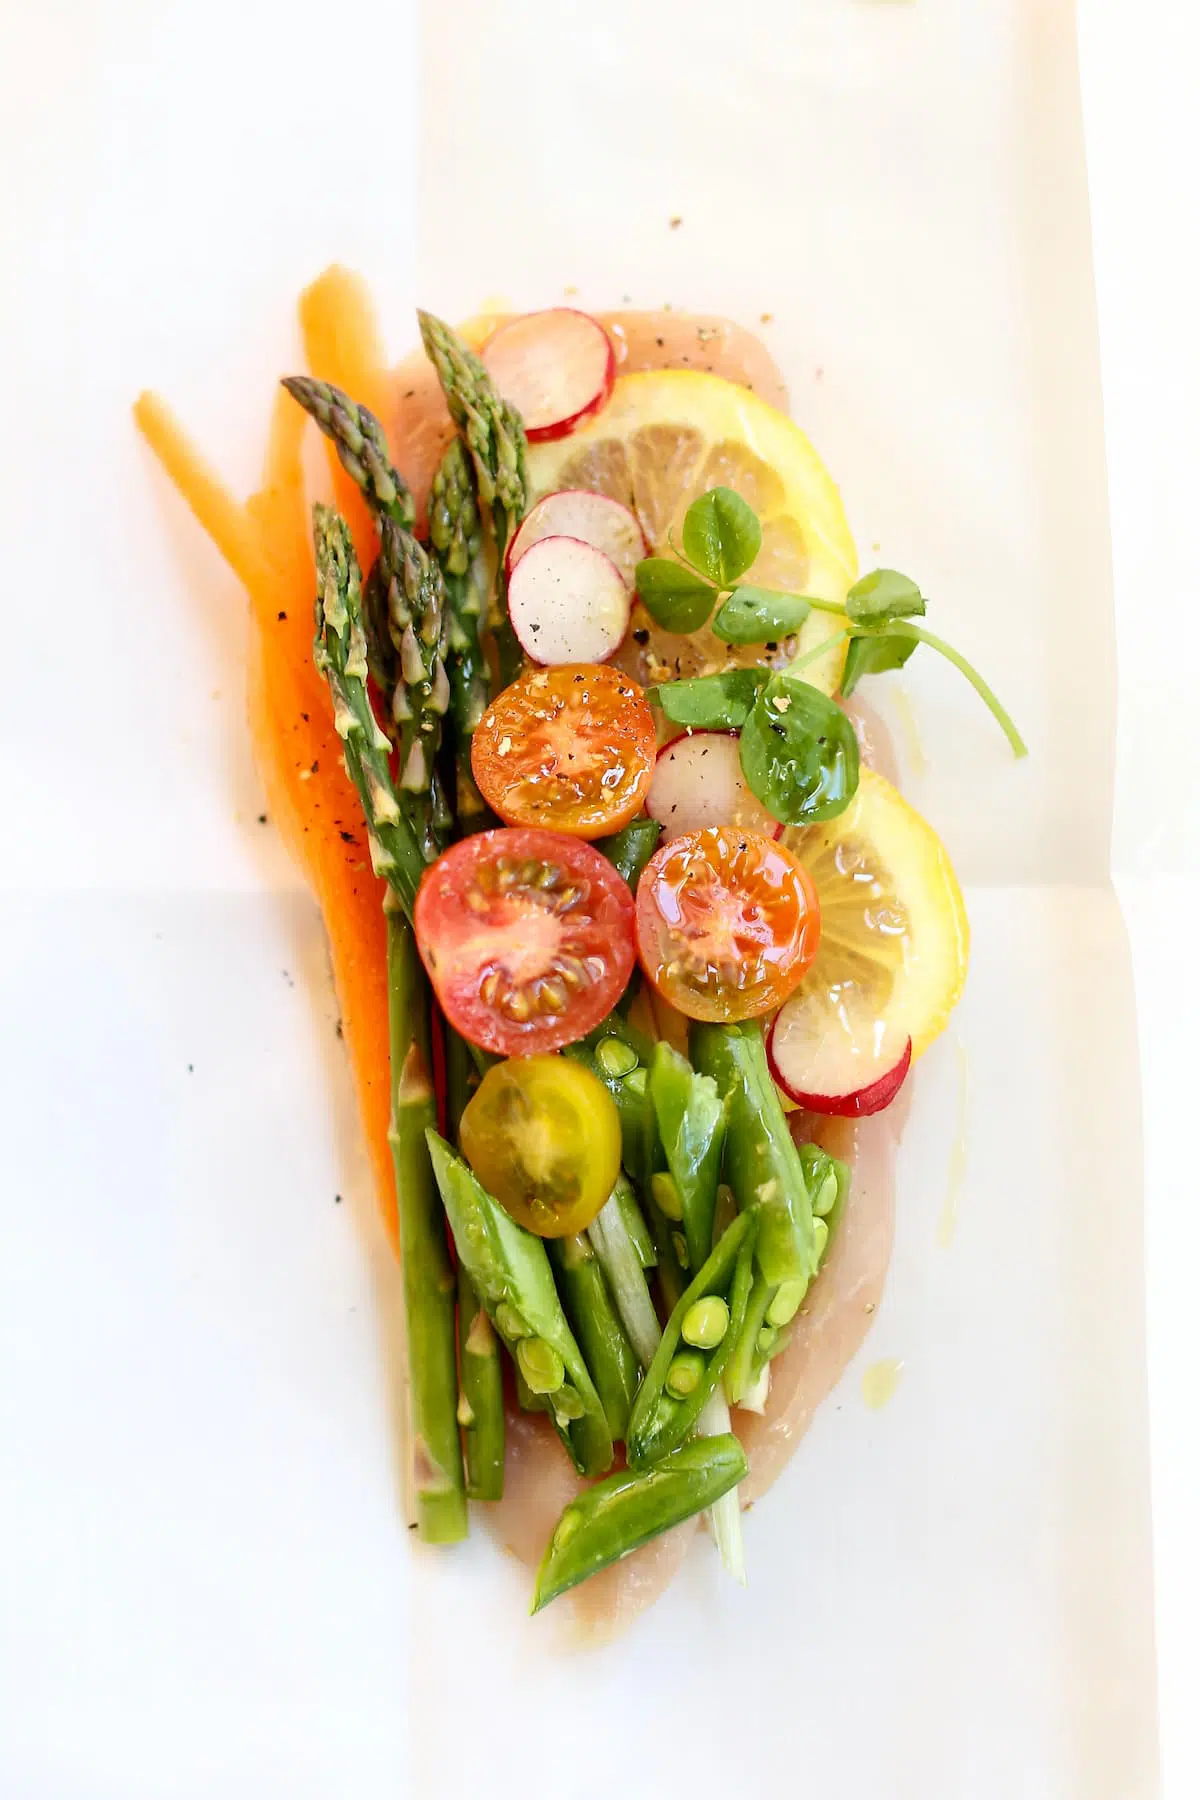 a raw chicken breast with vegetables on it, on parchment paper.